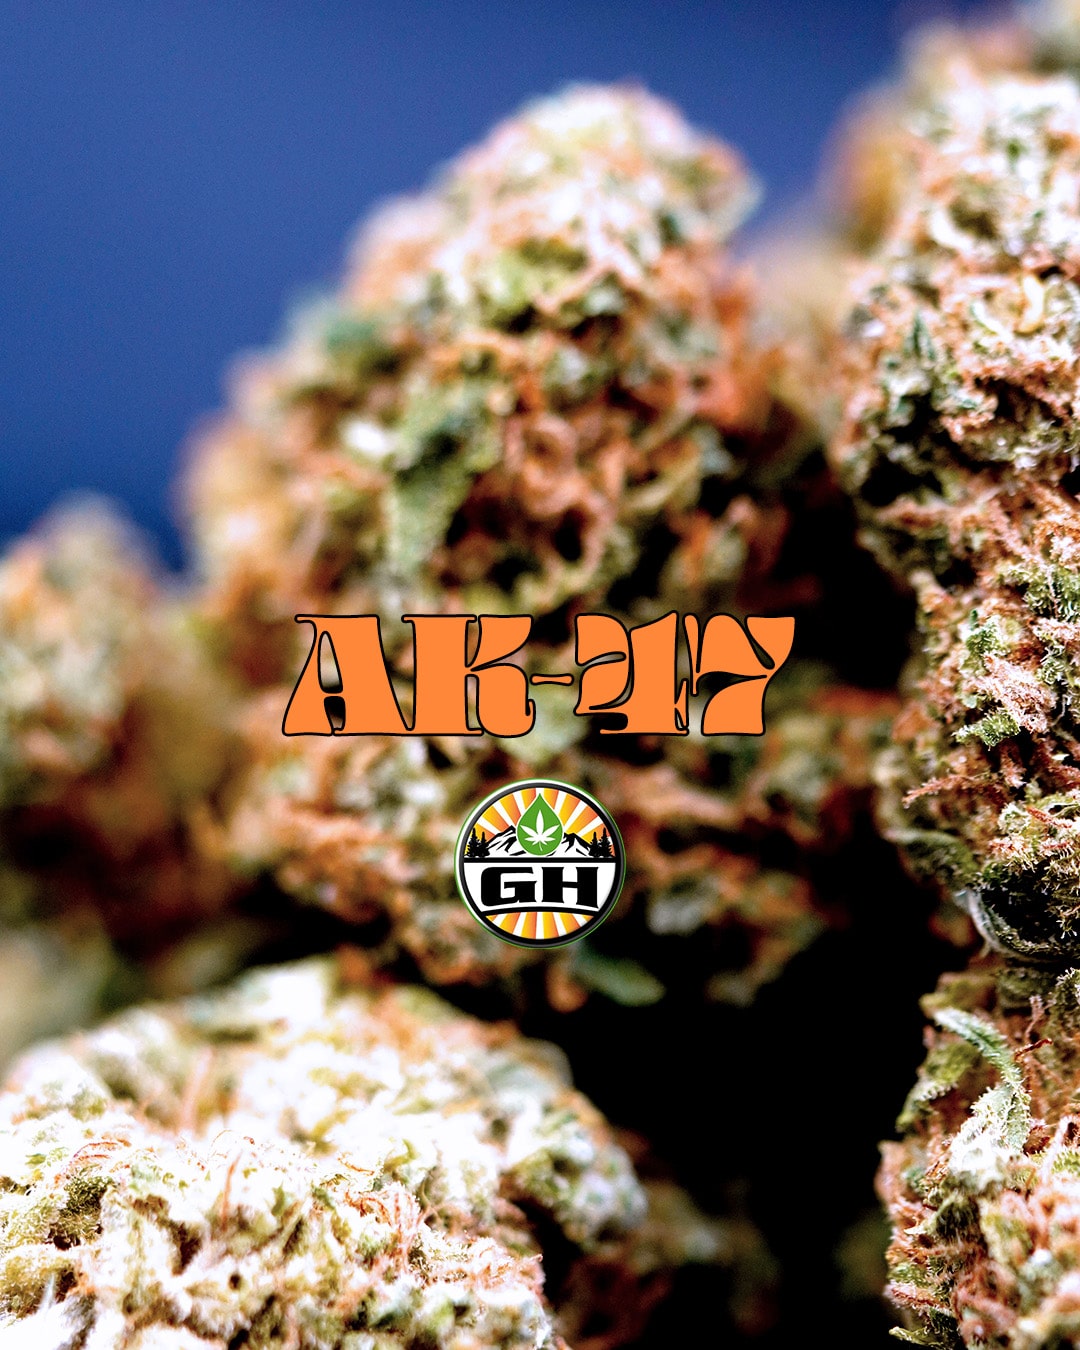 AK-47 Savtiva from GH Labs